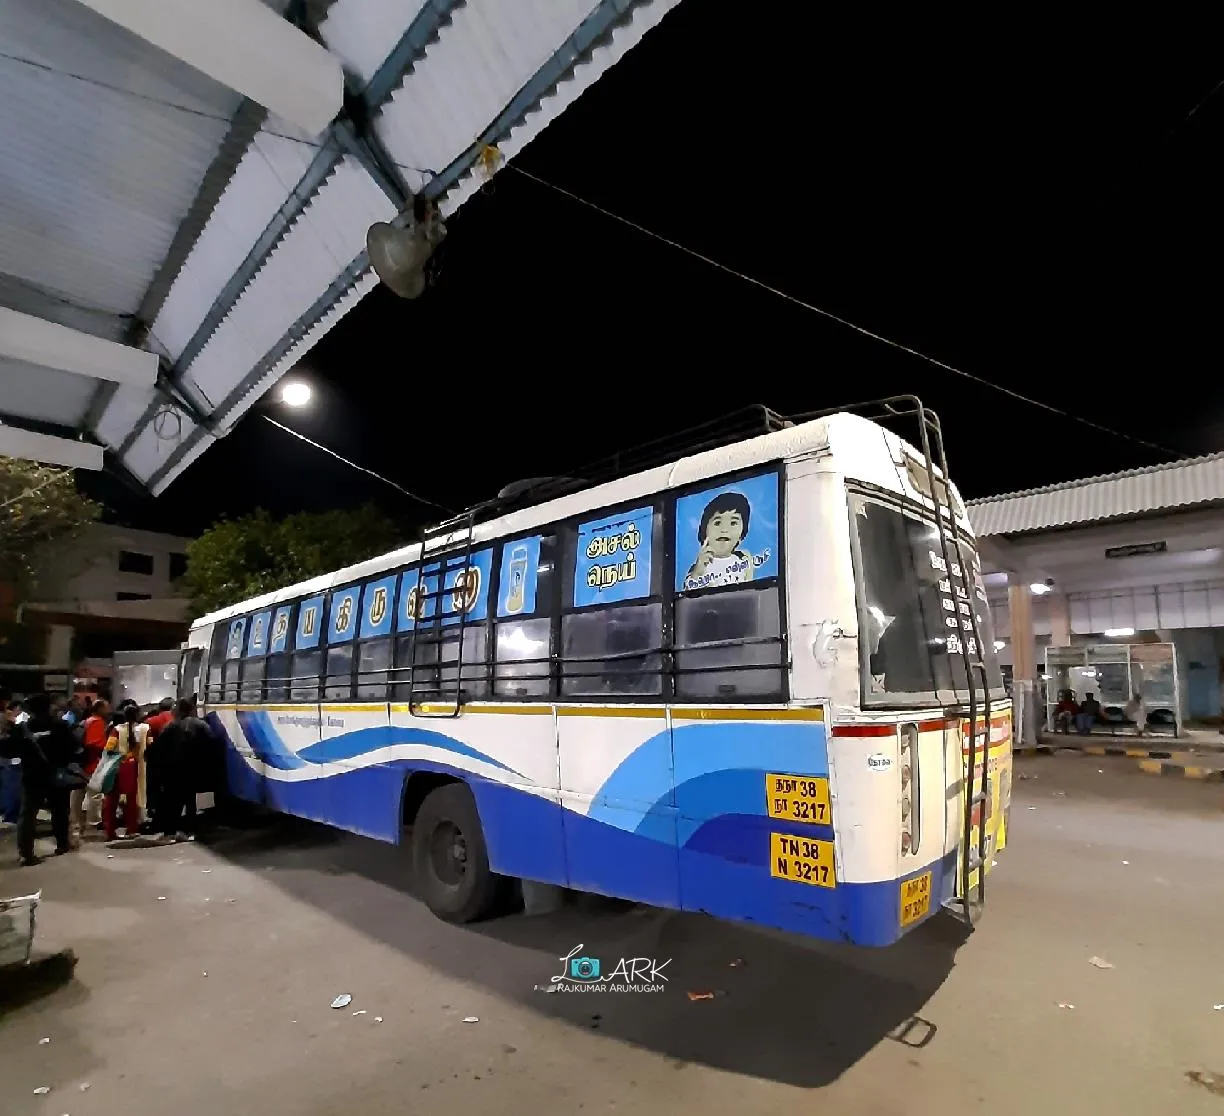 TNSTC Ultra Deluxe TN 38 N 3217 Coimbatore to Trichy Bus Timings 